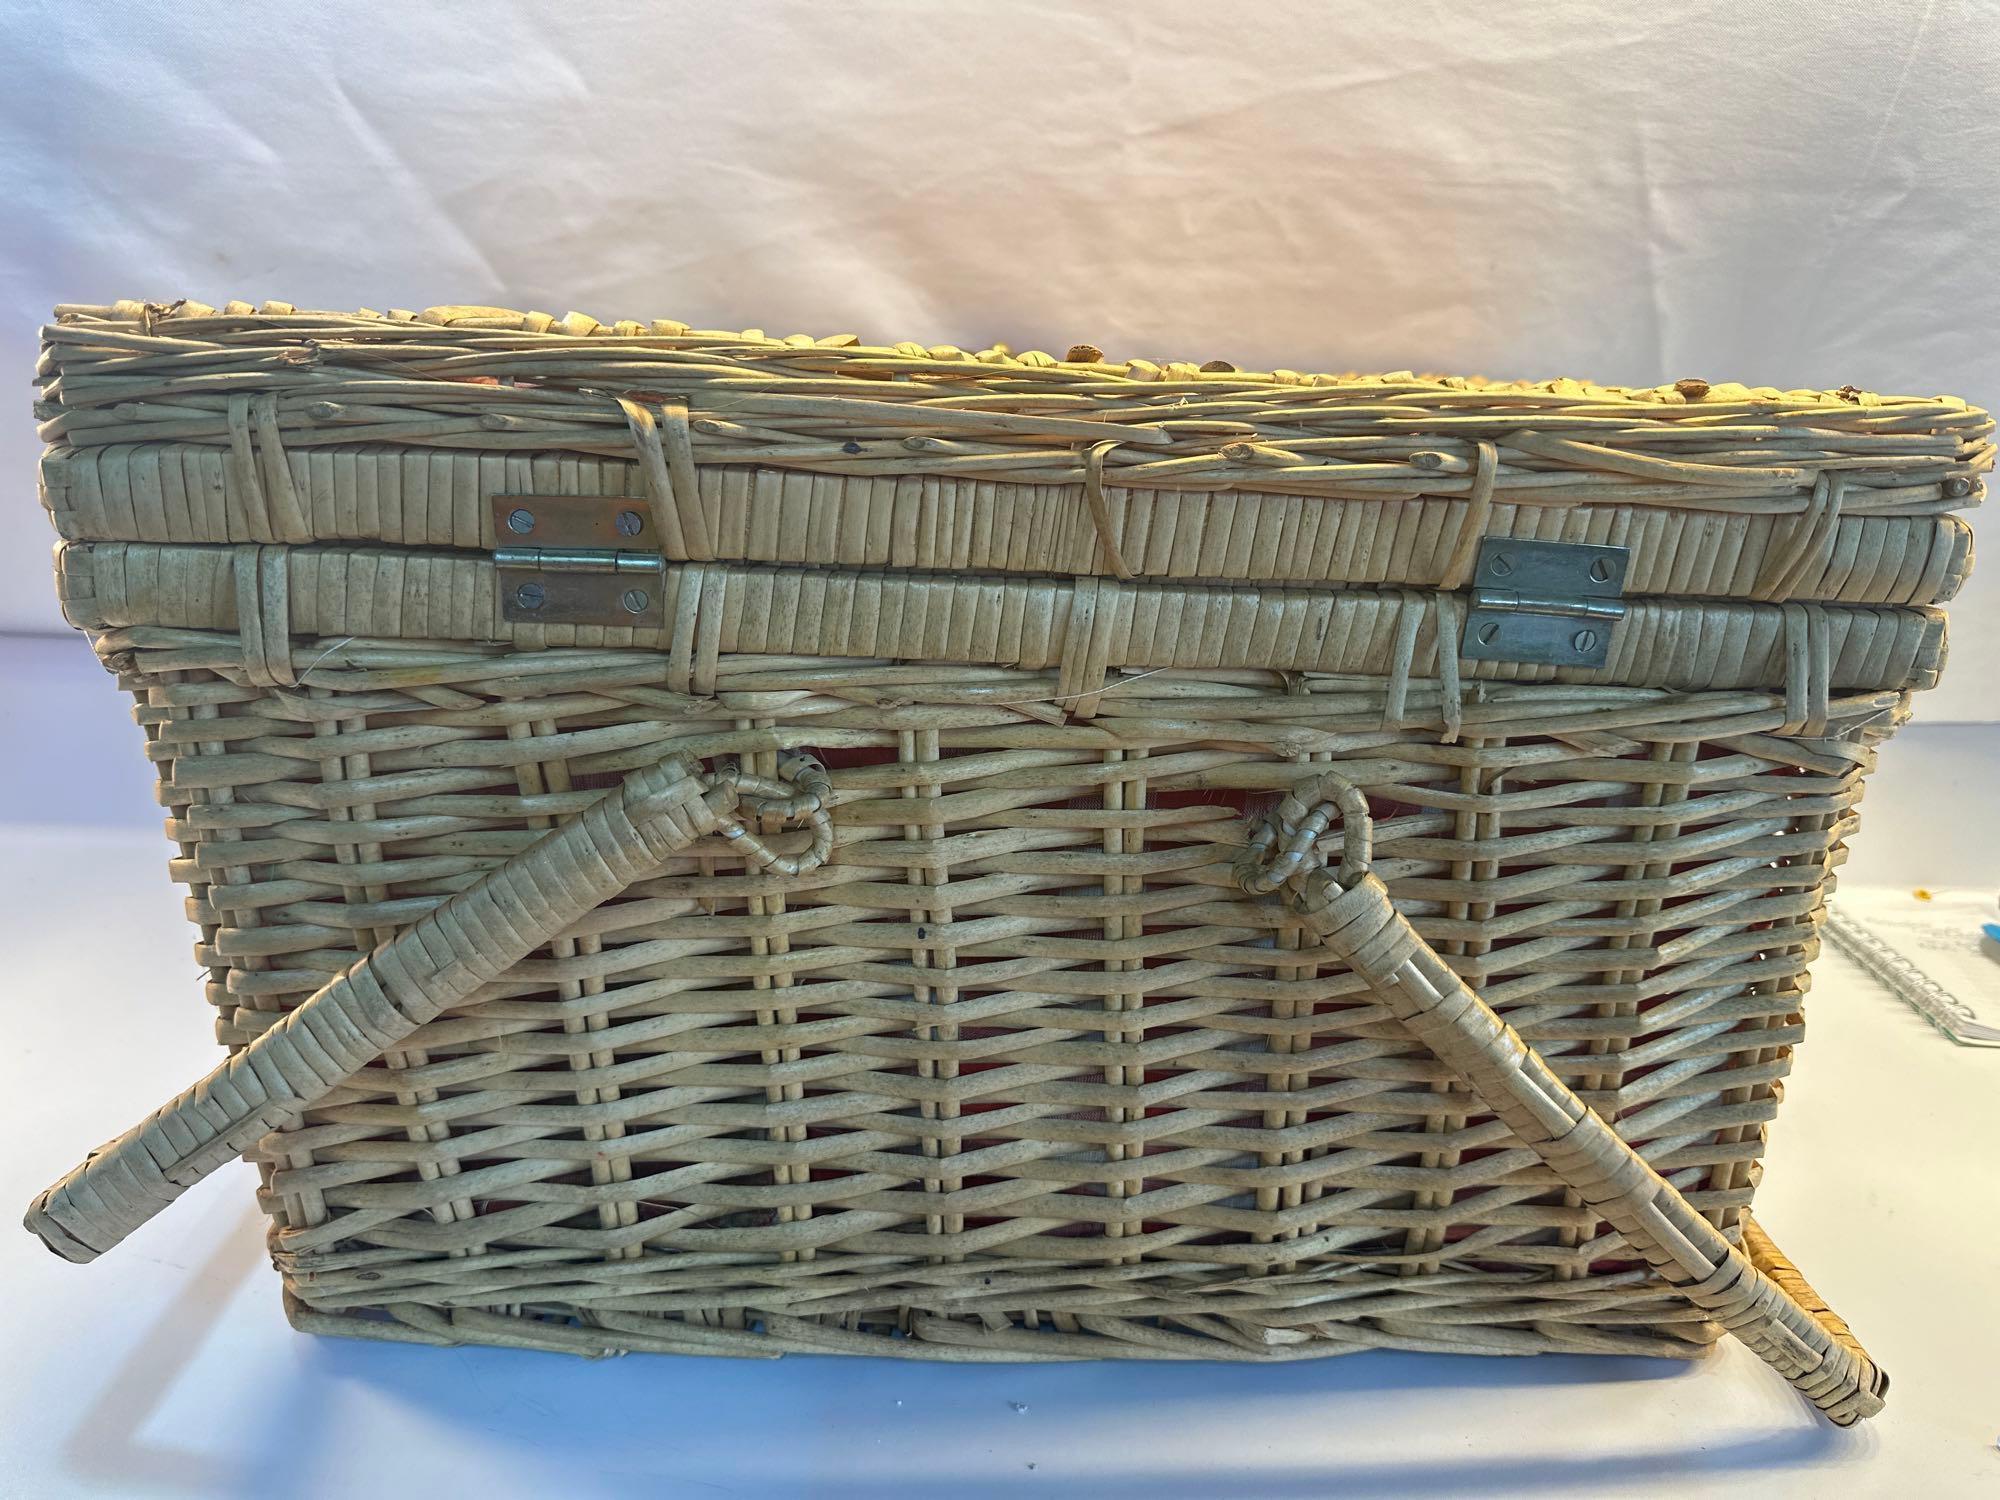 Wicker Picnic Basket With Handles Has Plates,Cups,Utensils,Etc